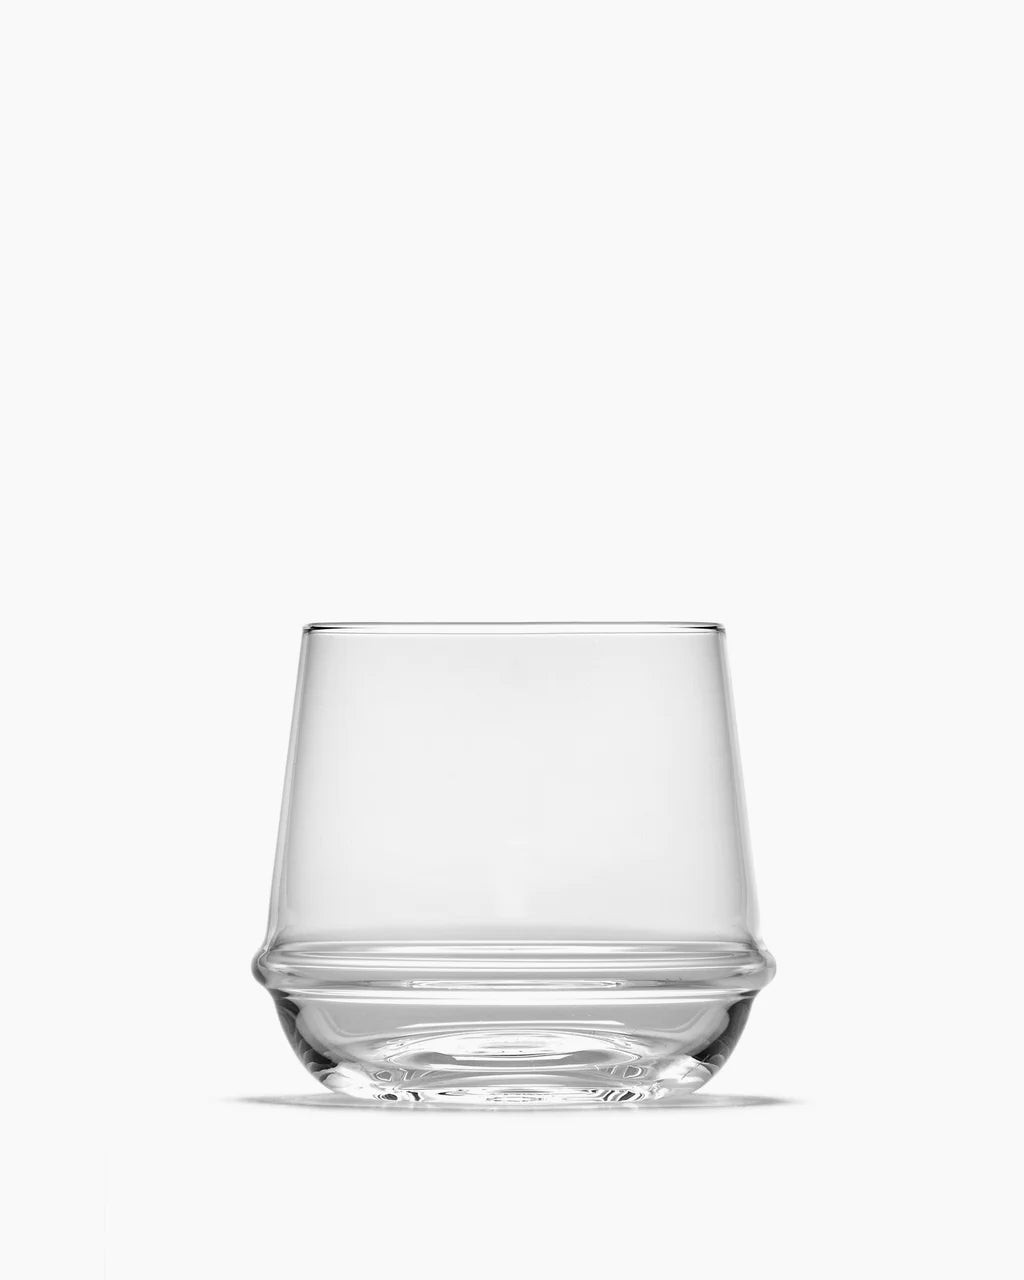 Serax Dune Whisky Glass collection Dune glassware by Kelly Wearstler